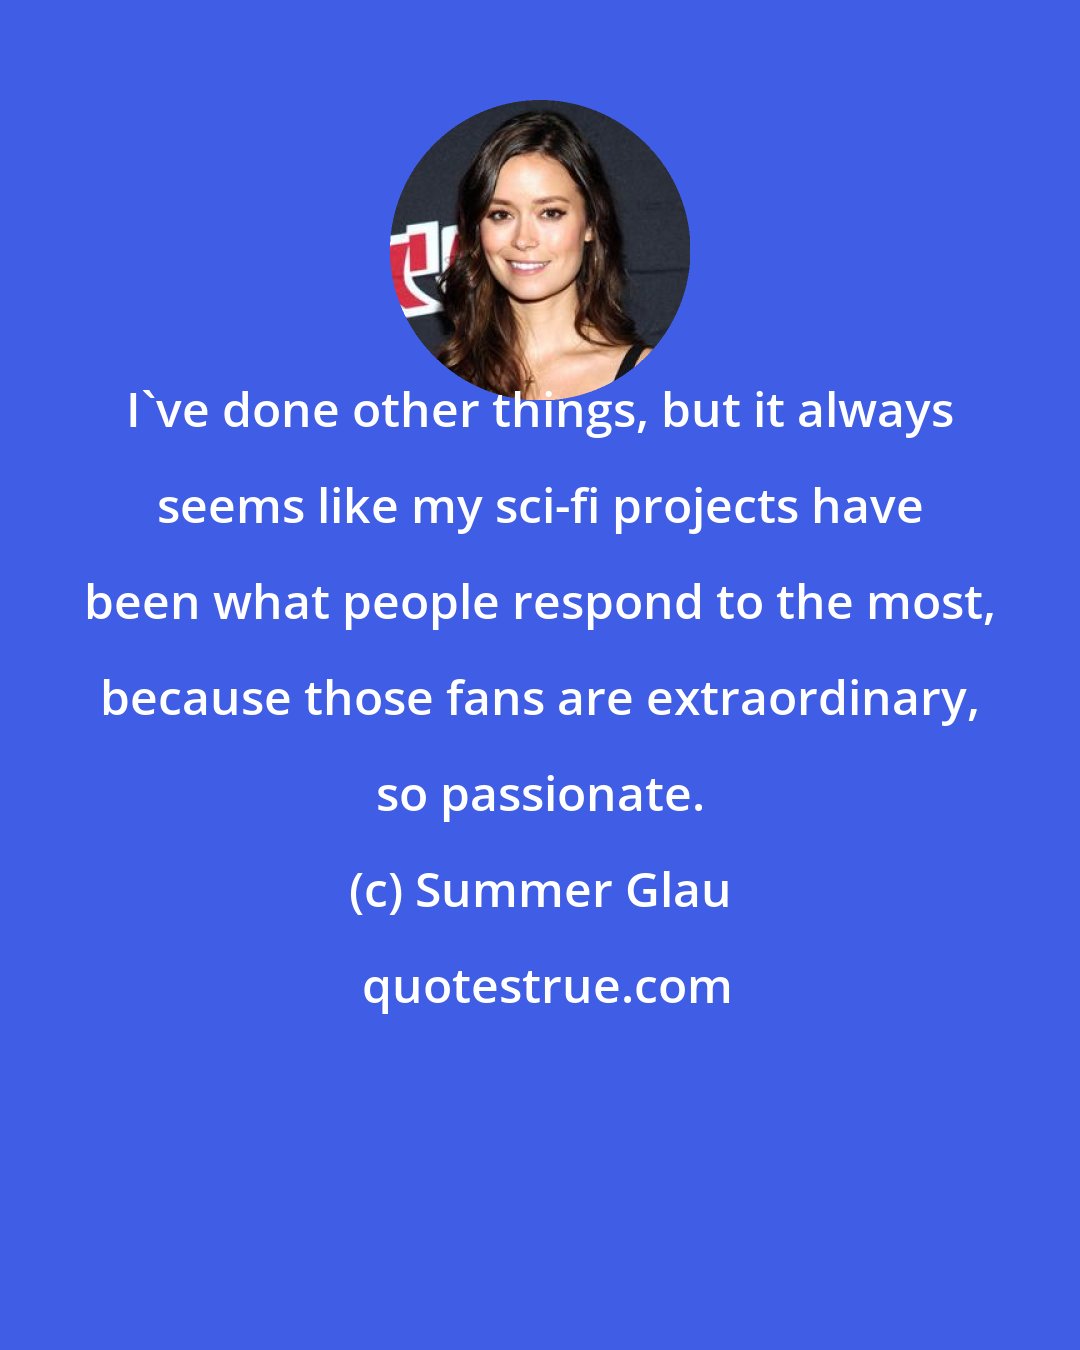 Summer Glau: I've done other things, but it always seems like my sci-fi projects have been what people respond to the most, because those fans are extraordinary, so passionate.